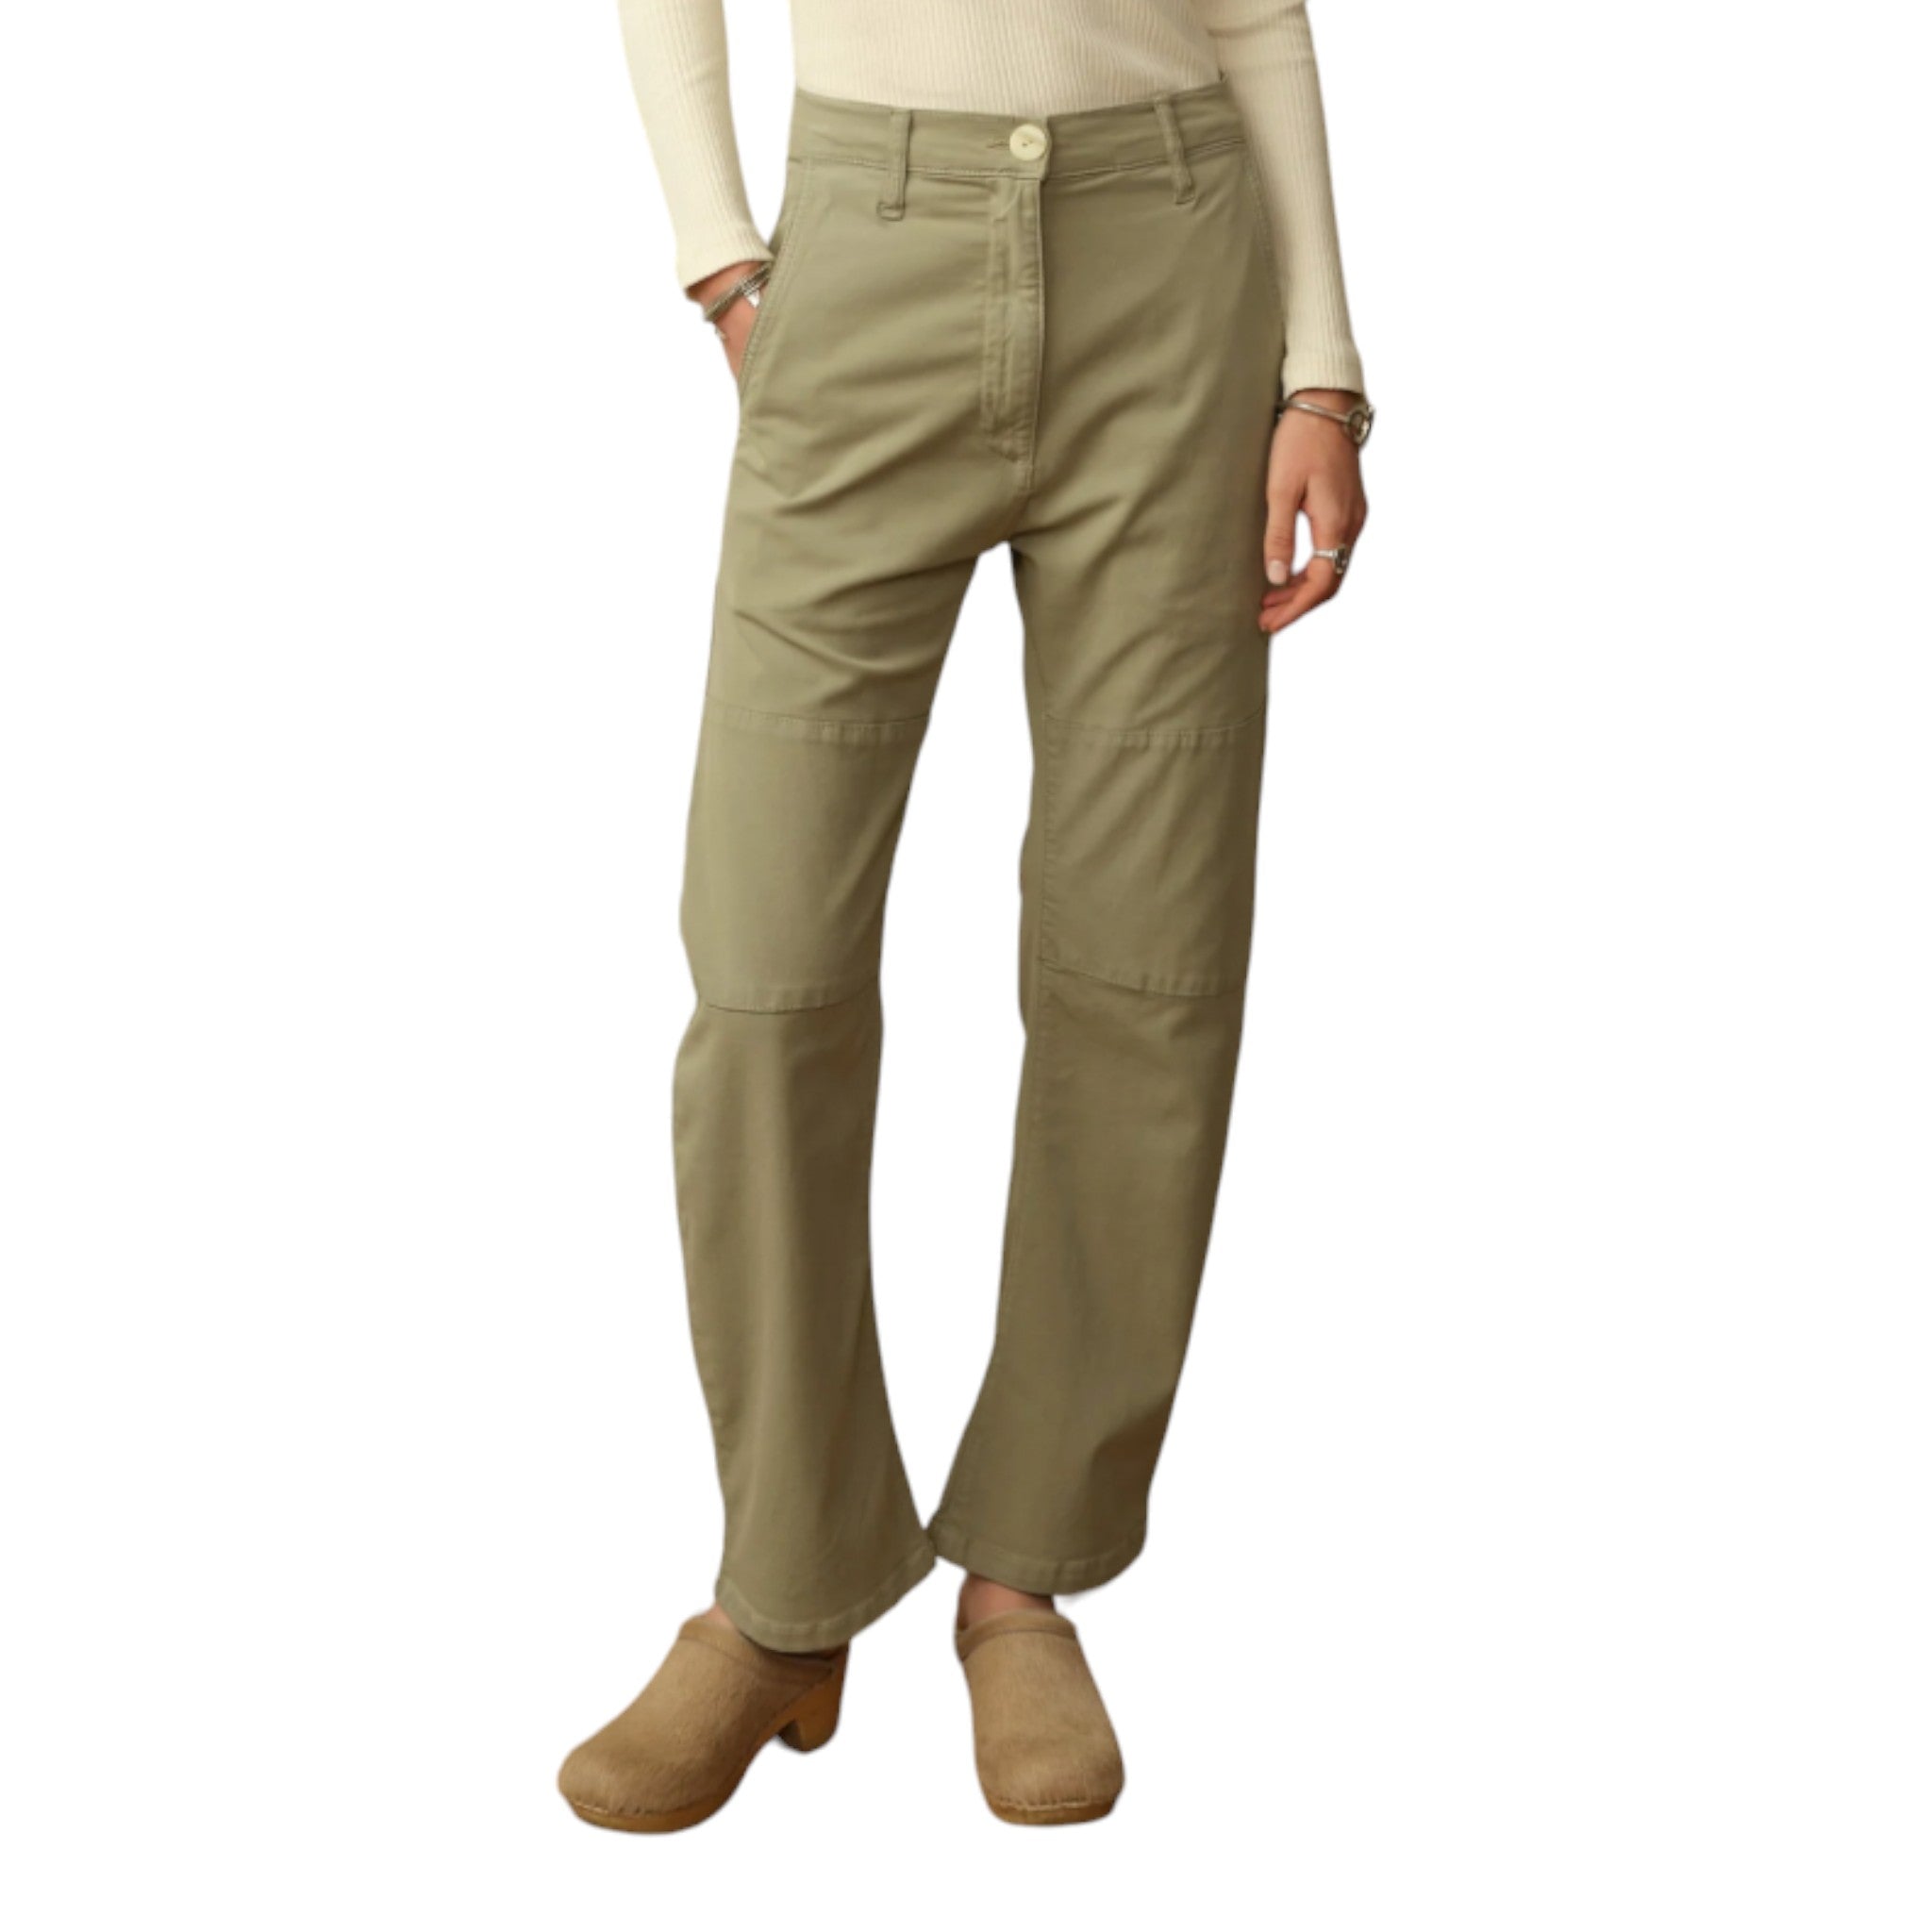 khaki green pant featuring a button and zip closure, belt loops, slant pockets in the front and patch pockets in the back